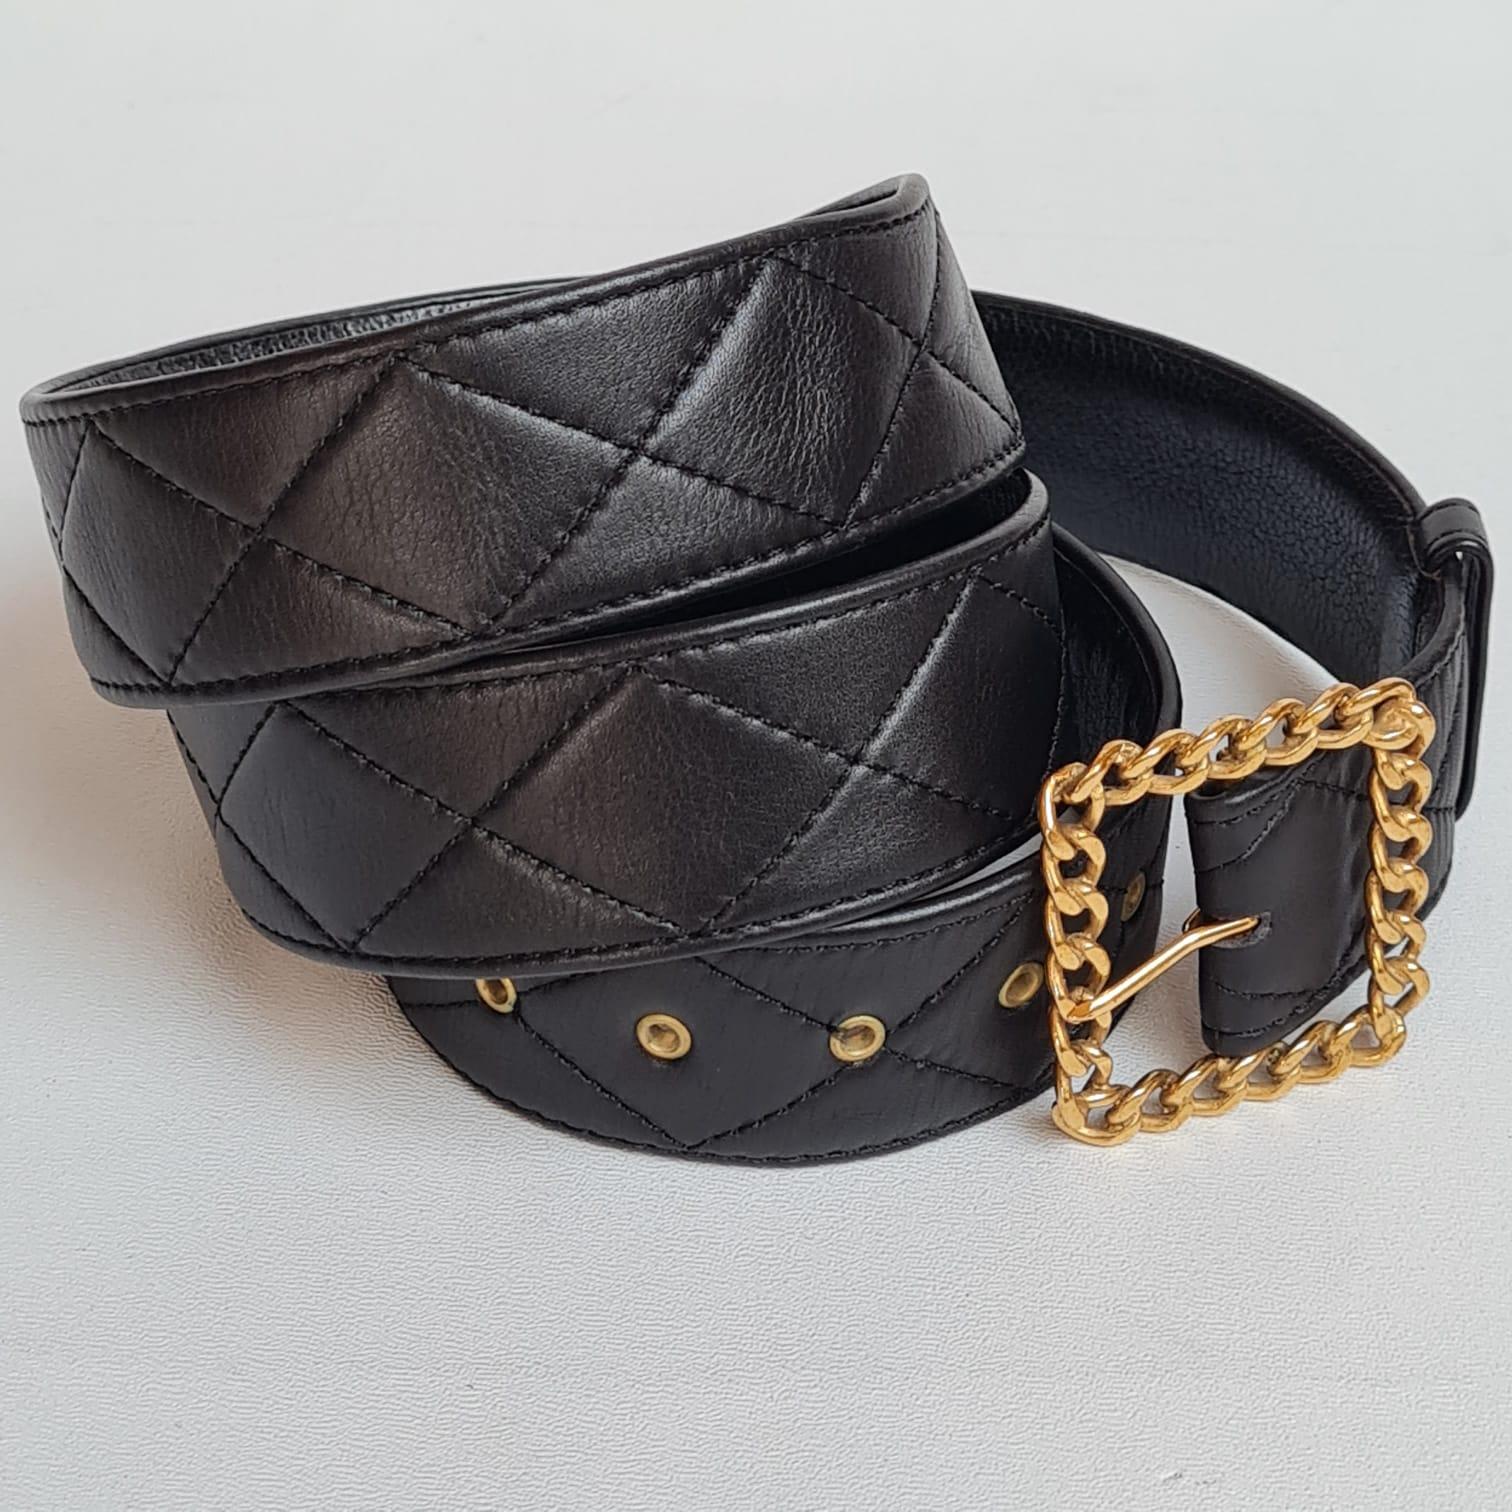 Beautiful vintage quilted leather belt in great condition. Rare size, fits men as well. Classic gold plated buckle.